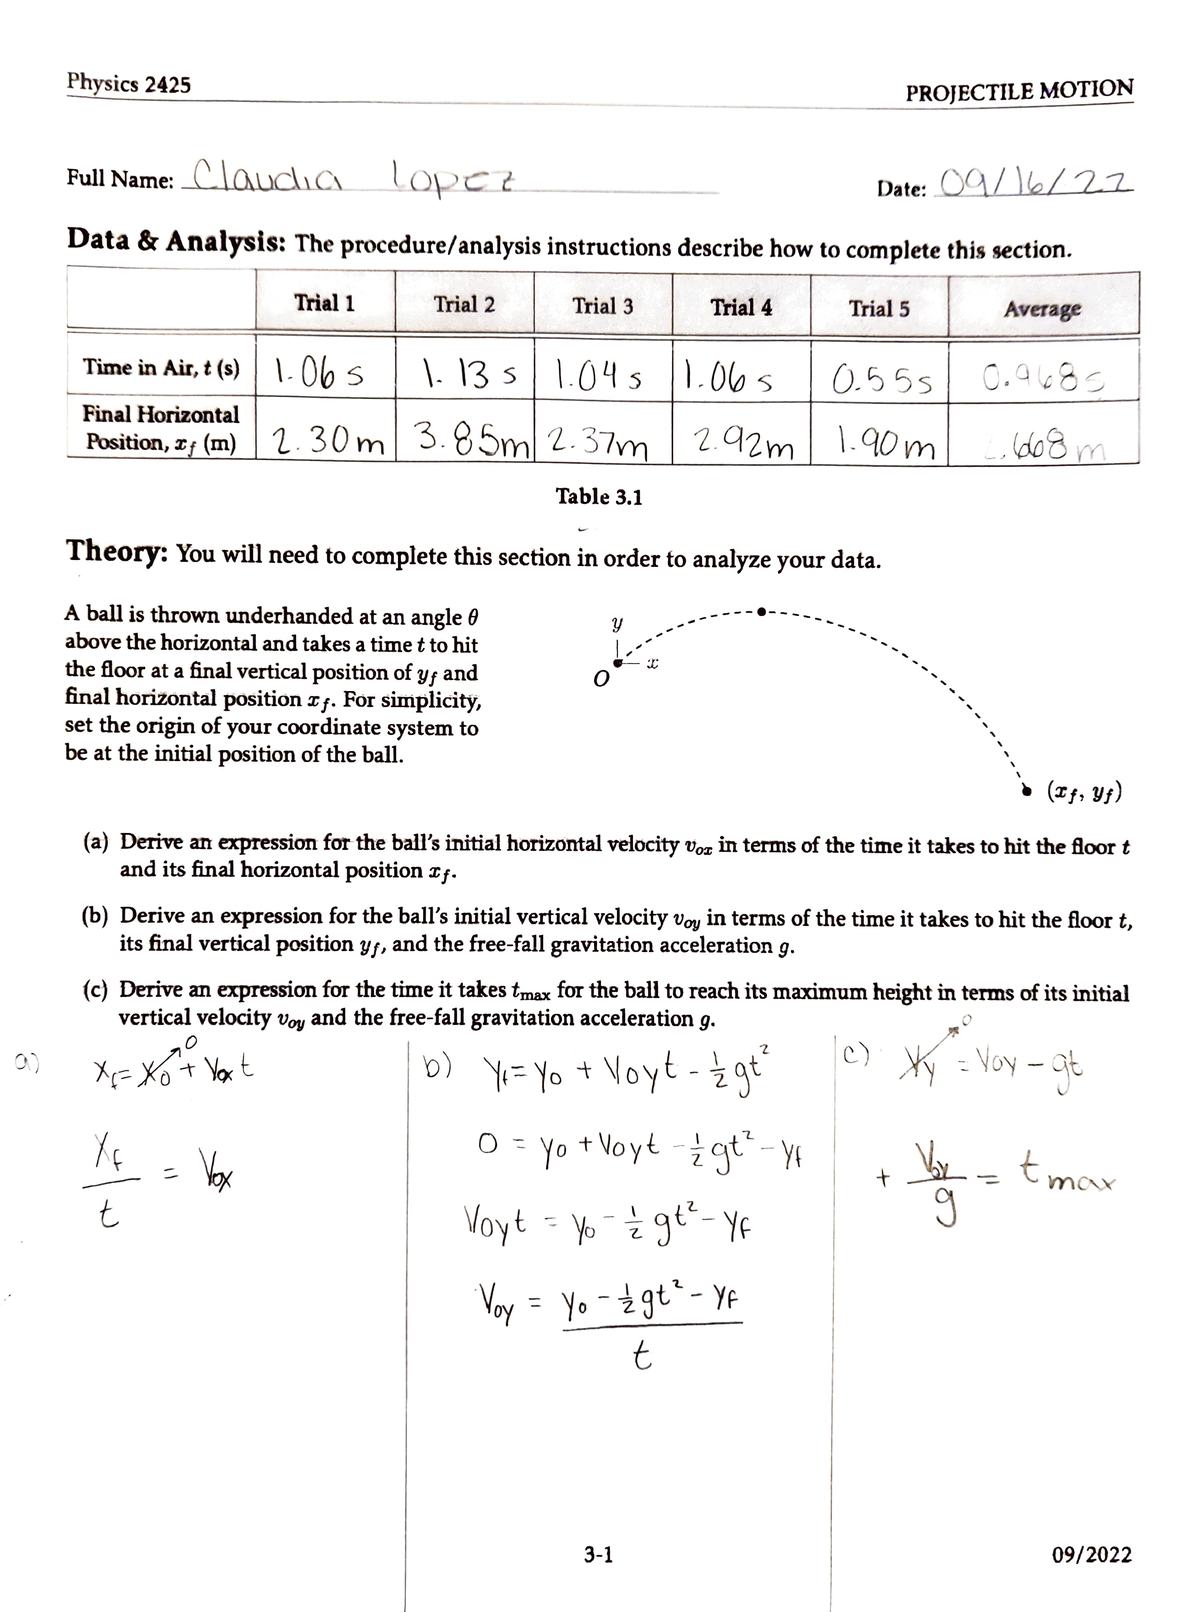 Lab 3 Projectile Motion Lab Lab 3 Physics 2425 Projectile Motion Full Nameclaudia Lopez 7857